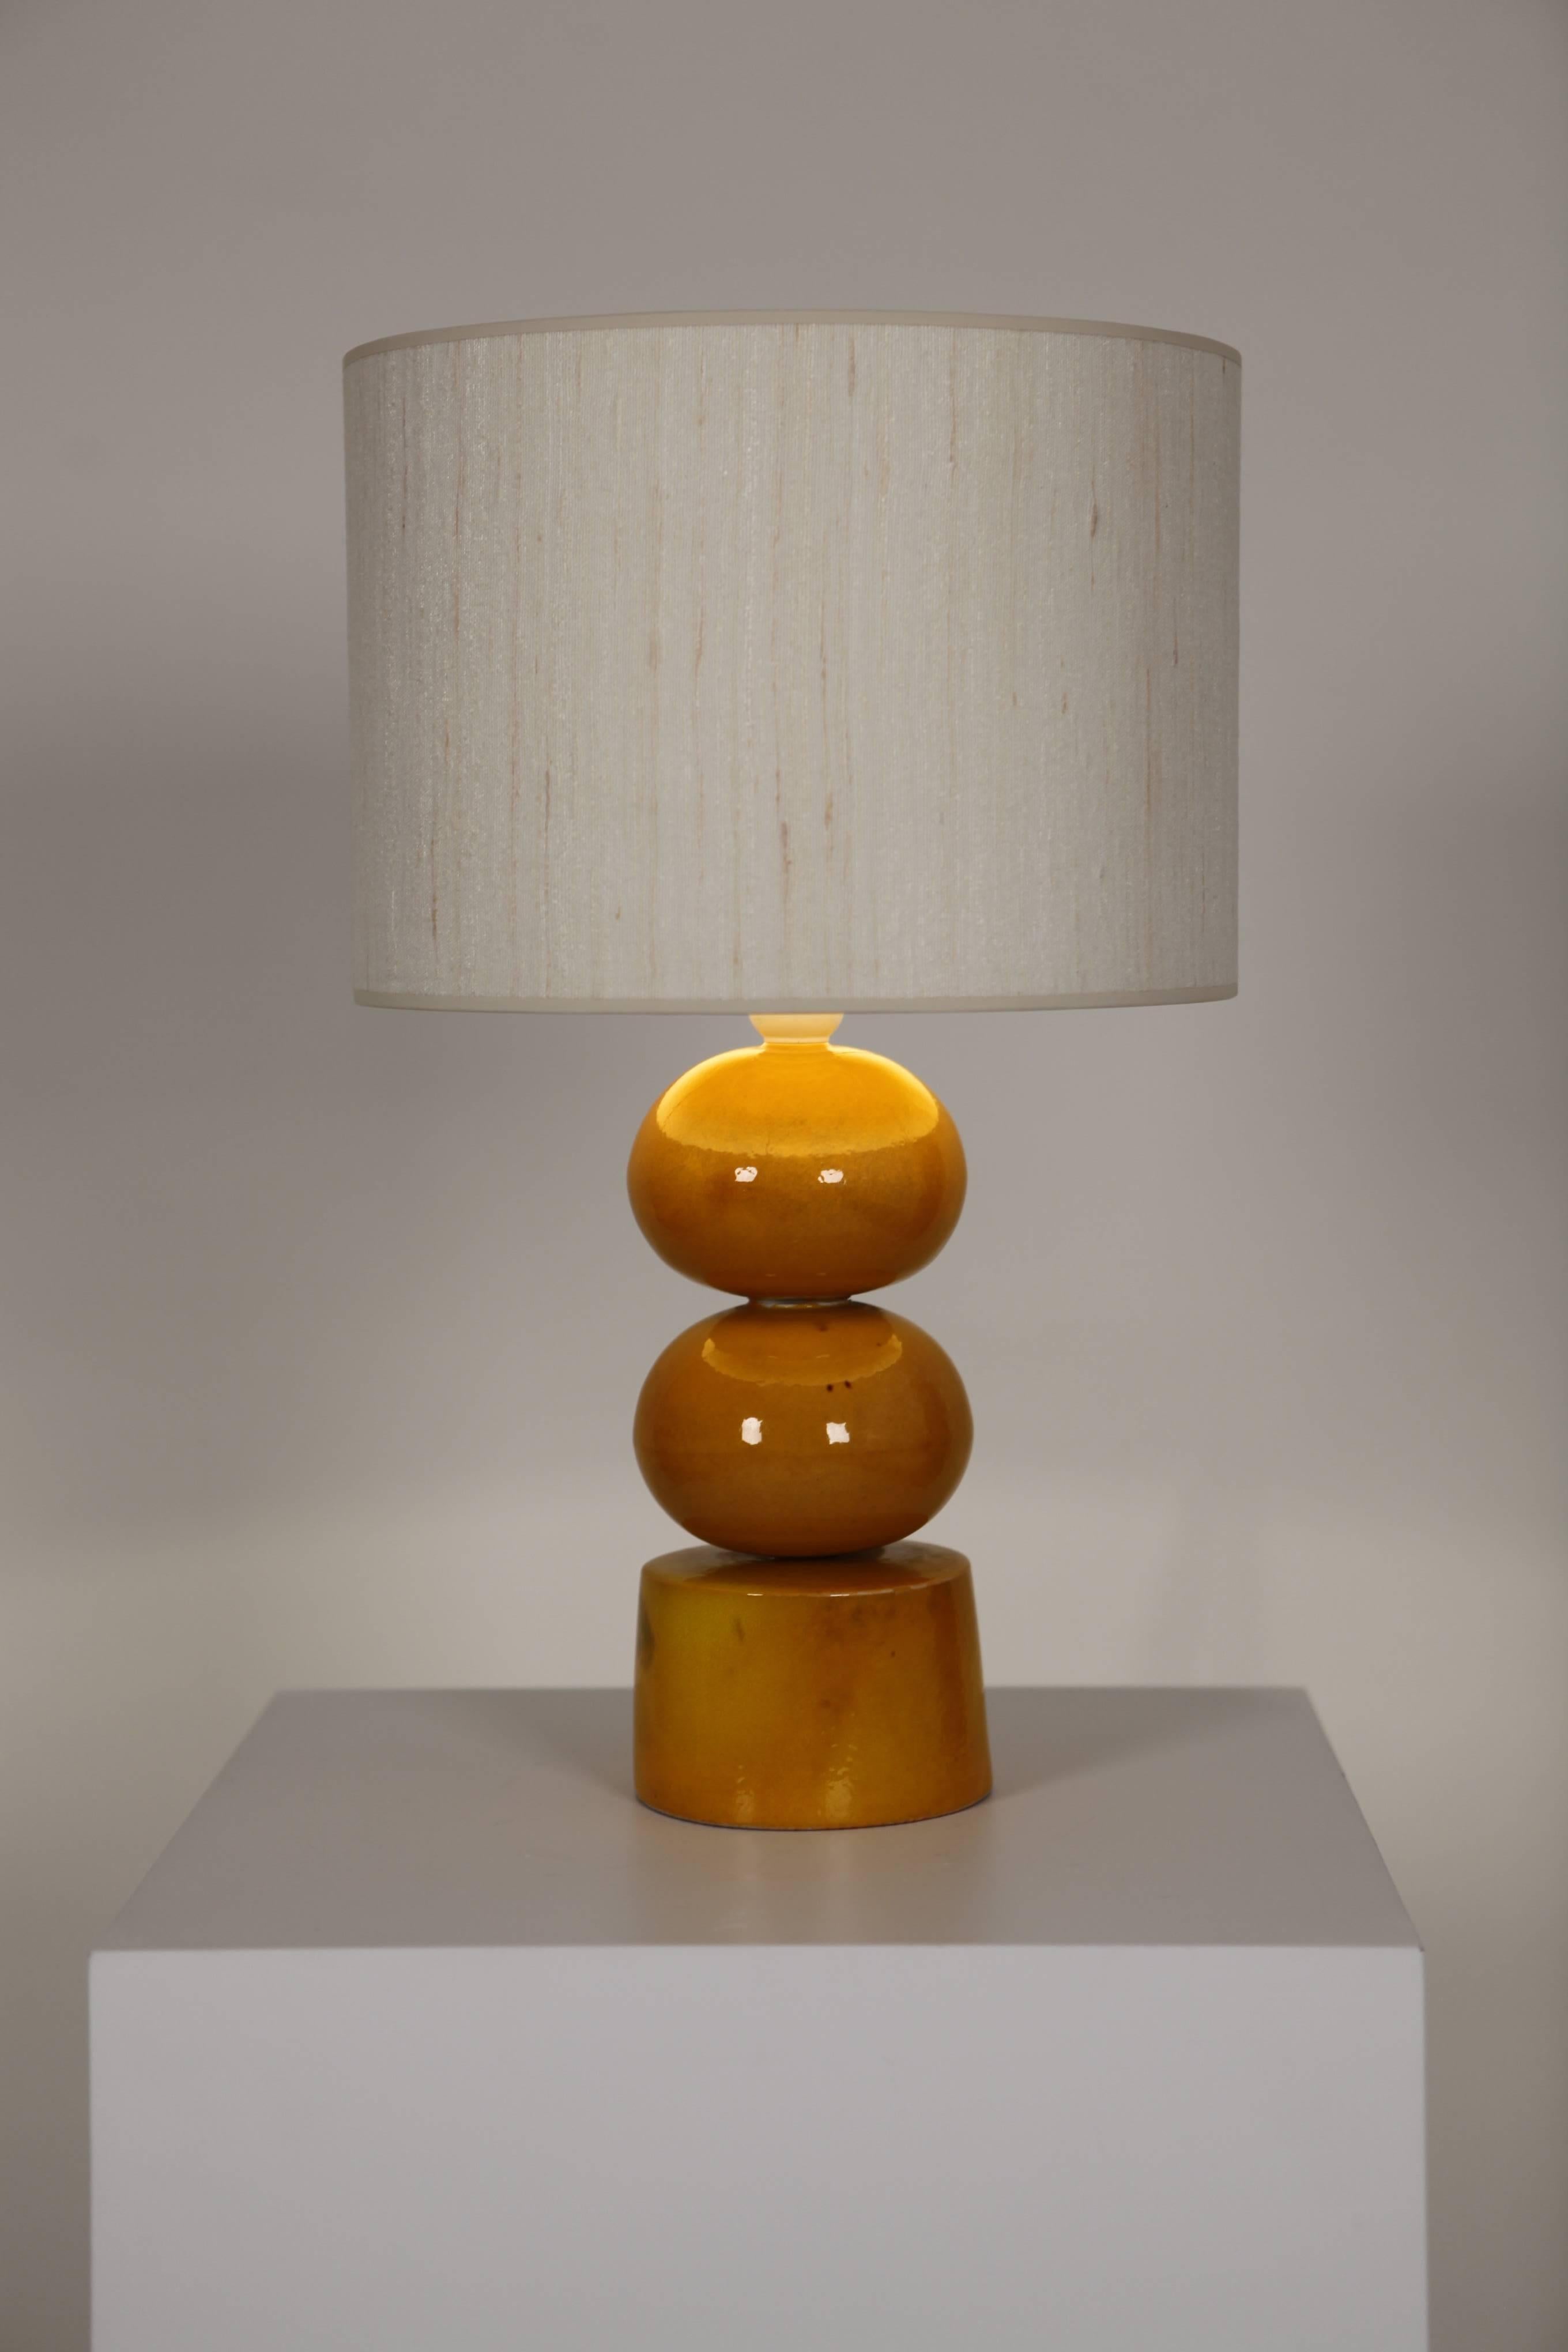 A Gustavsberg, 1970s glazed stoneware table lamp,
with a handmade silk shade,
Sweden.
   